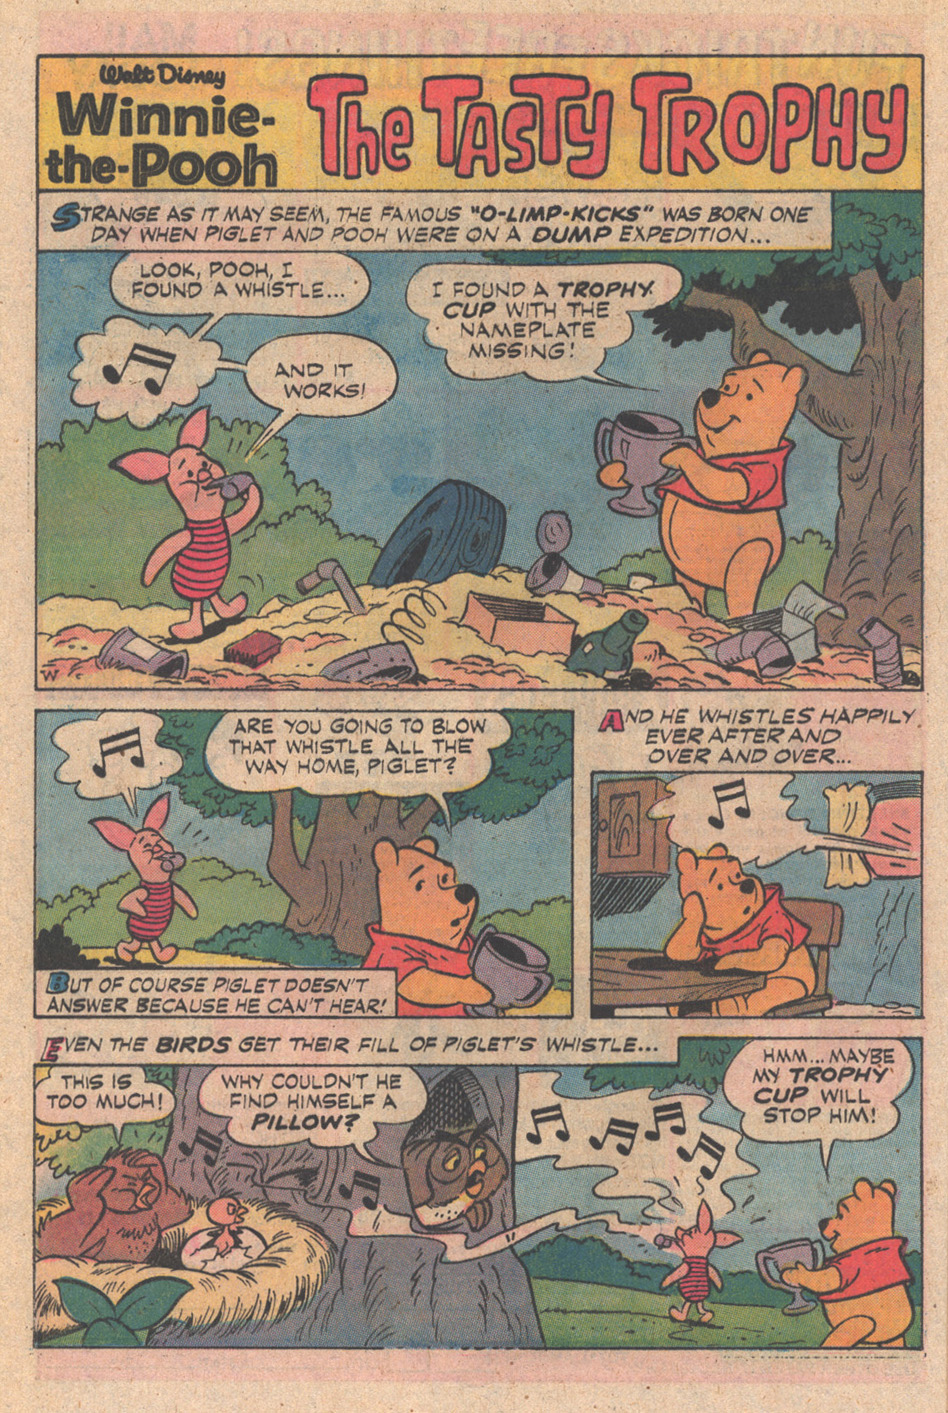 Read online Winnie-the-Pooh comic -  Issue #2 - 20